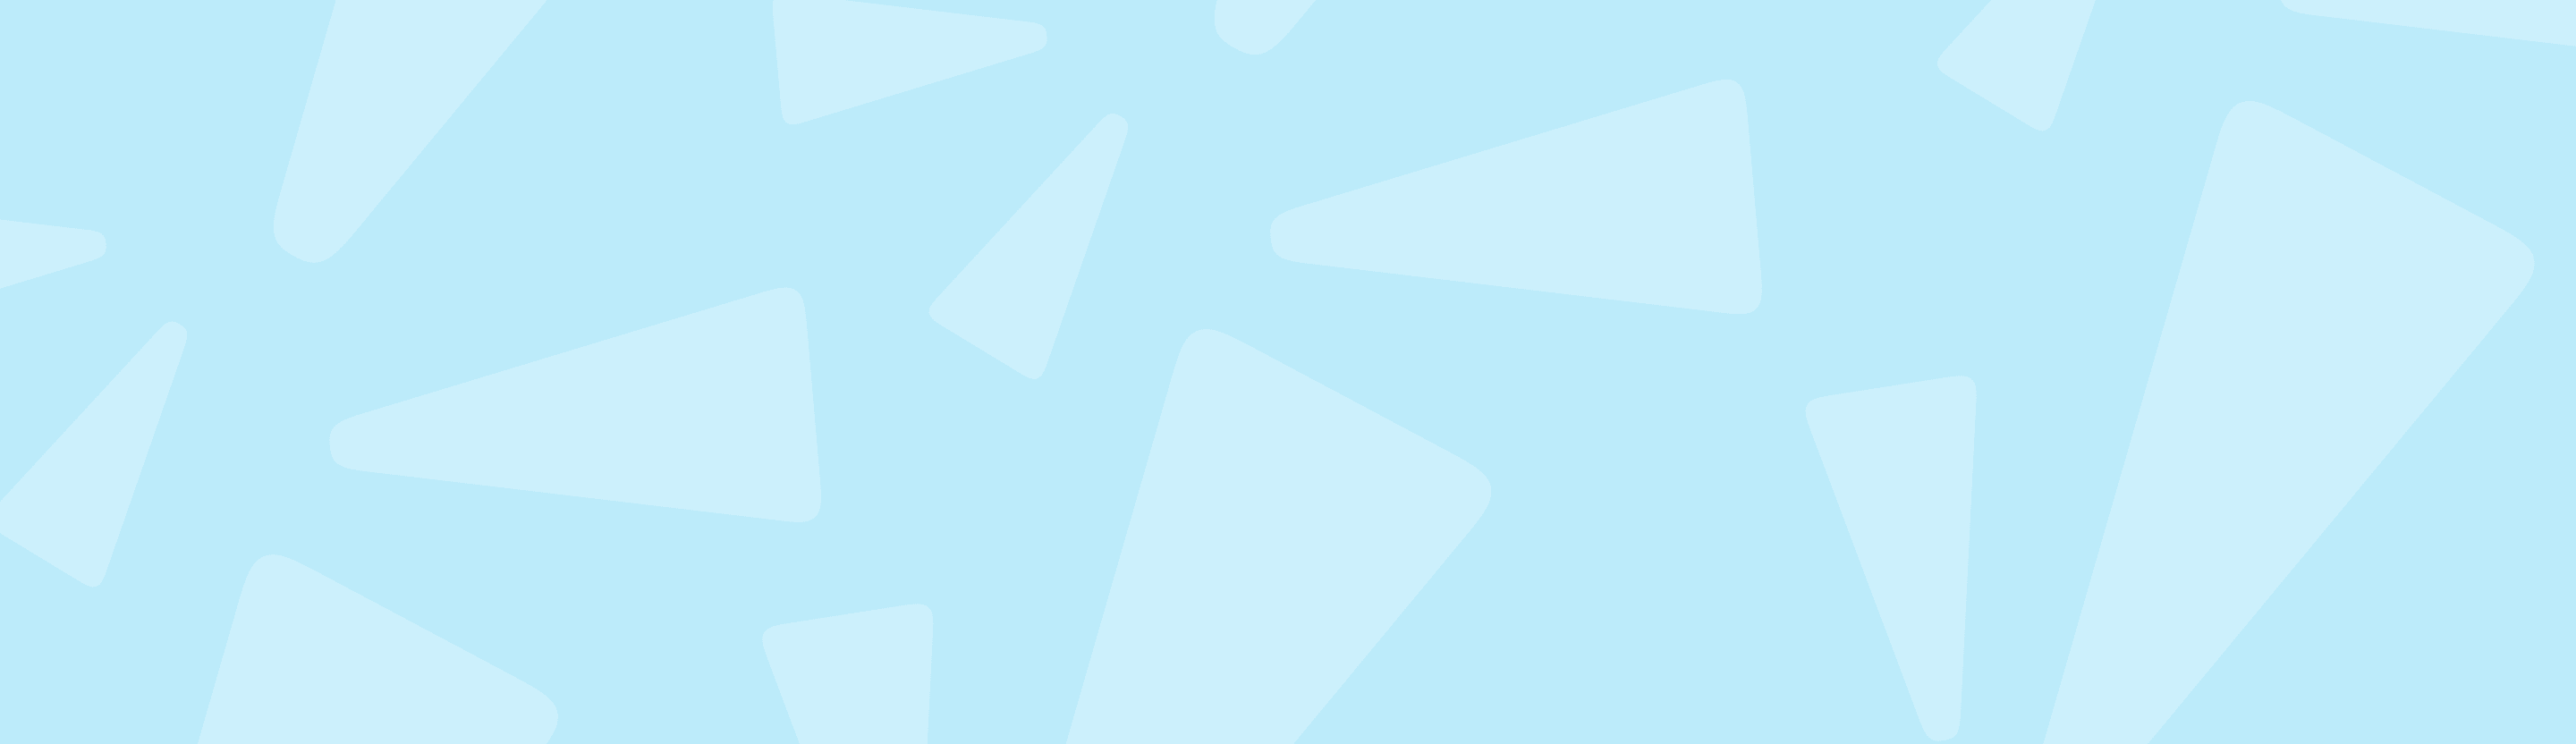 light blue background image with pattern